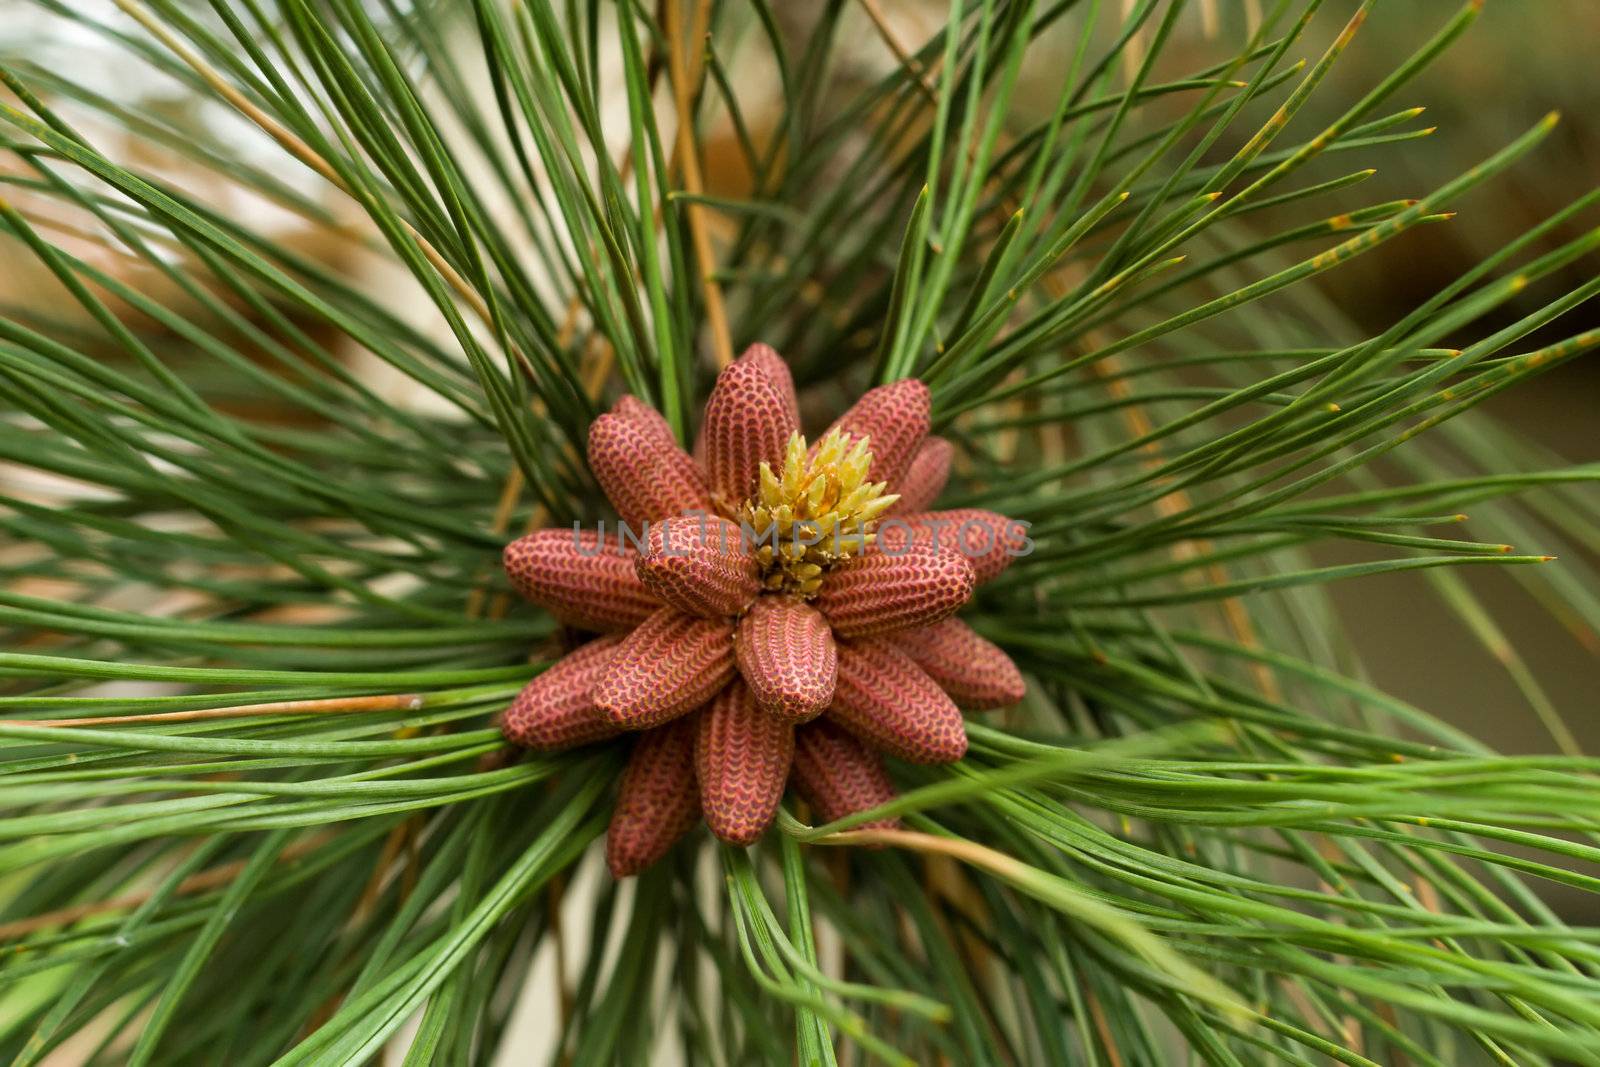 Birth on some pine cones by Coffee999